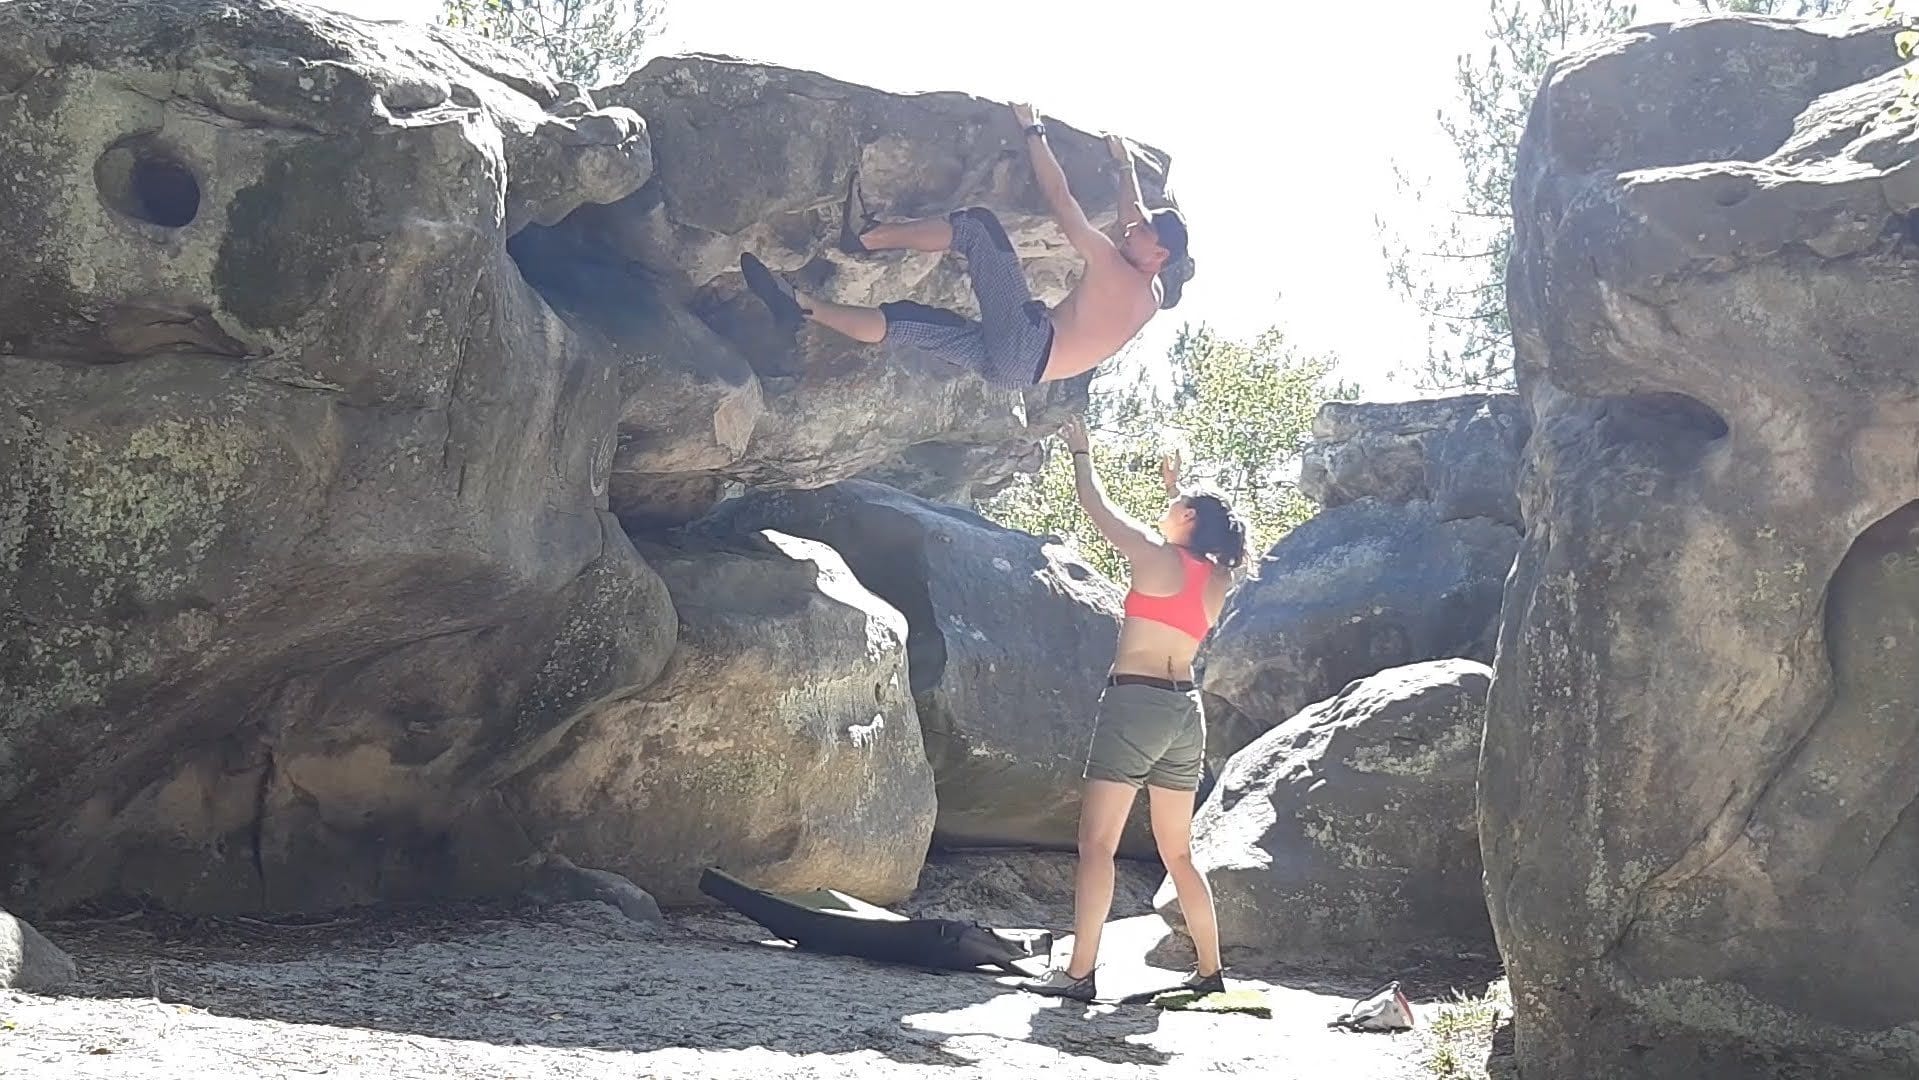 Top 5 tips for Bouldering at Fontainebleau - dewerstone